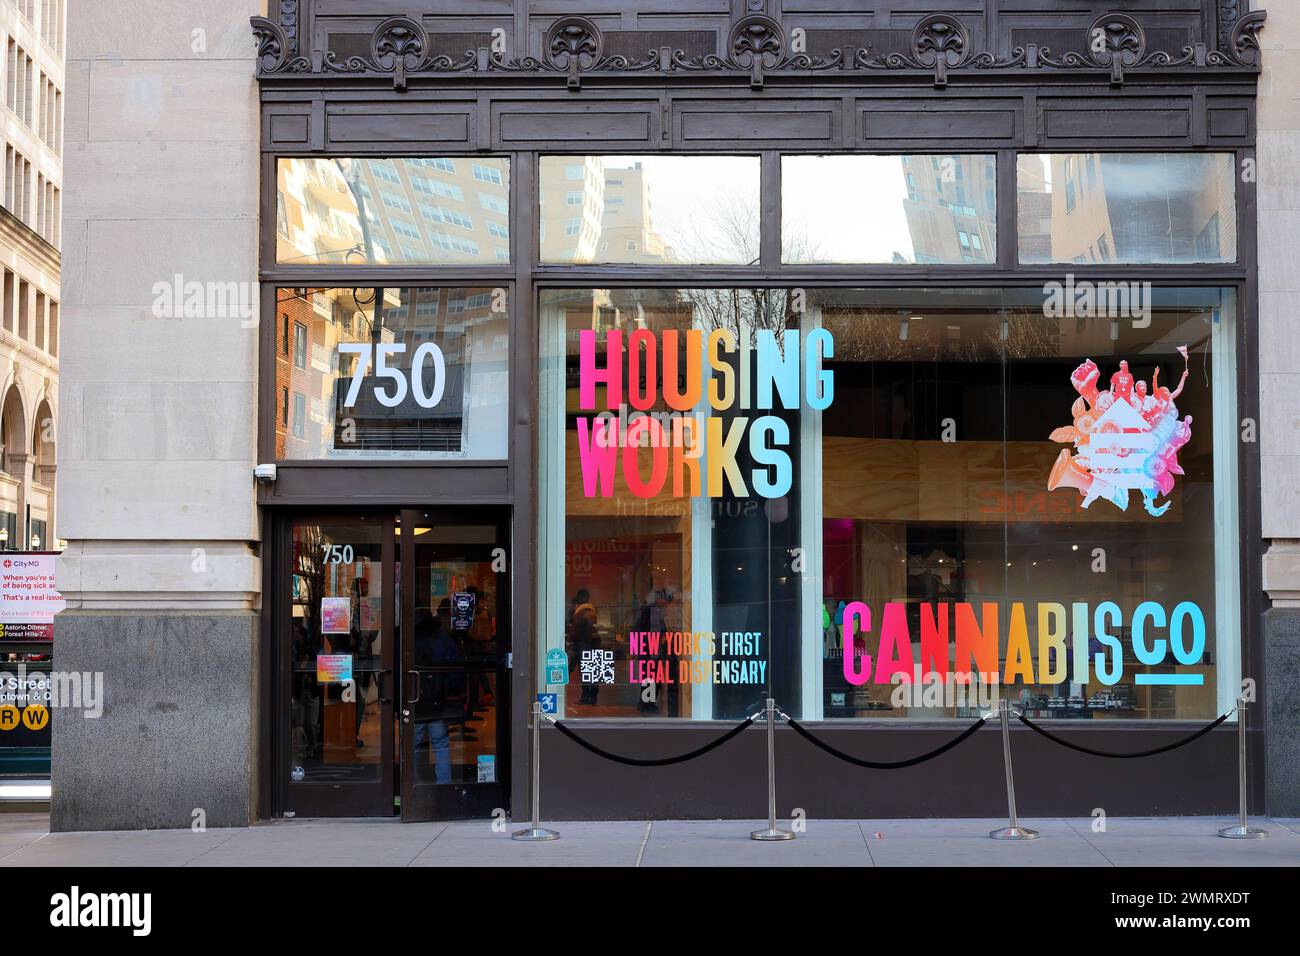 Housing Works Cannabis Co, 750 Broadway, New York. NYC storefront photo of a NY State licensed cannabis dispensary in Manhattan's Greenwich Village. Stock Photo